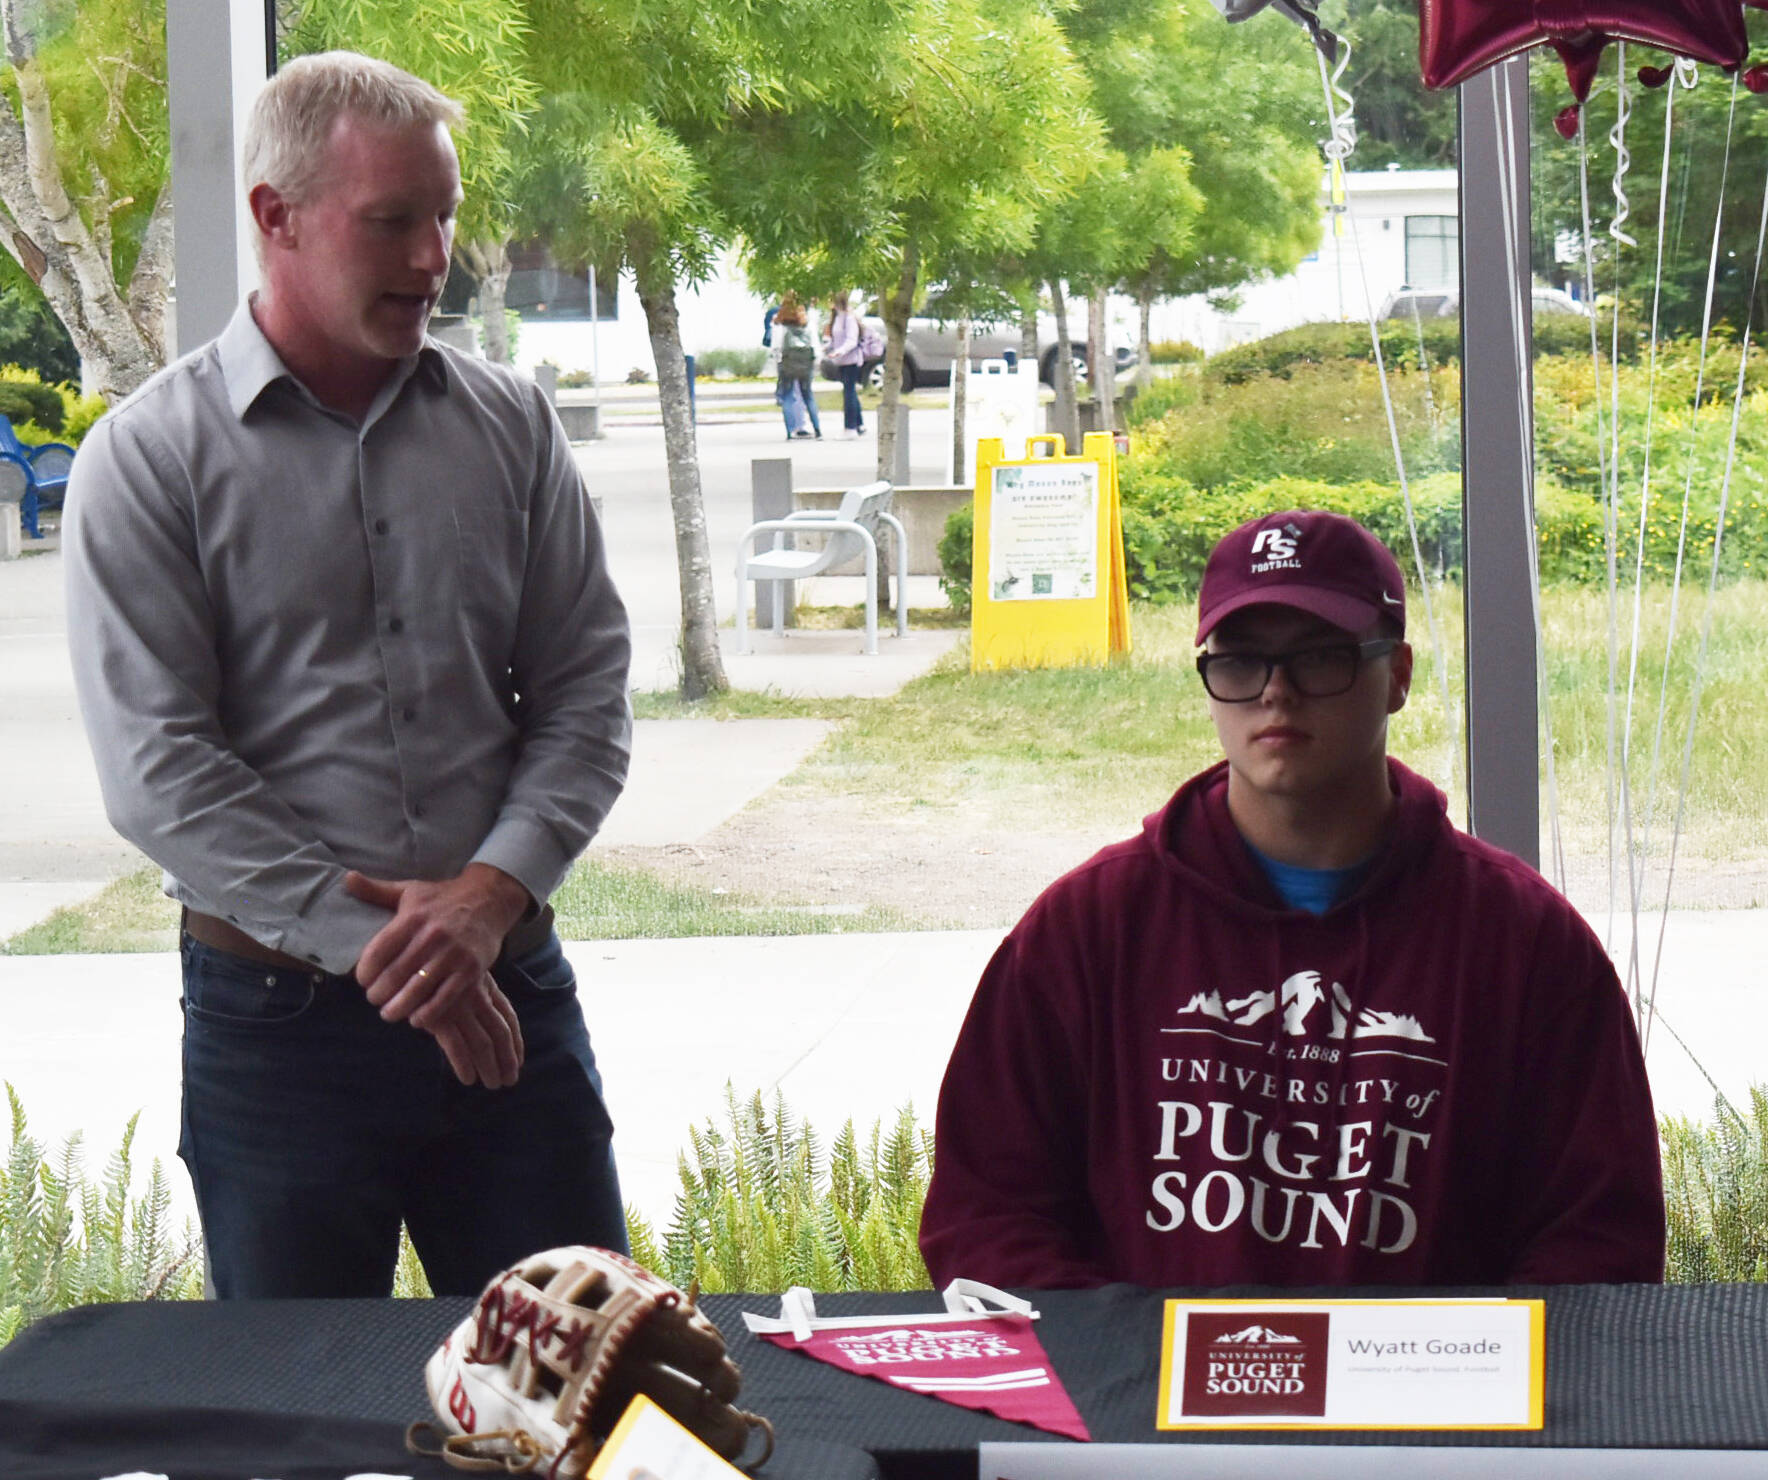 Dan Pippinger says University of Puget Sound will be surprised by Wyatt Goade on the football field.